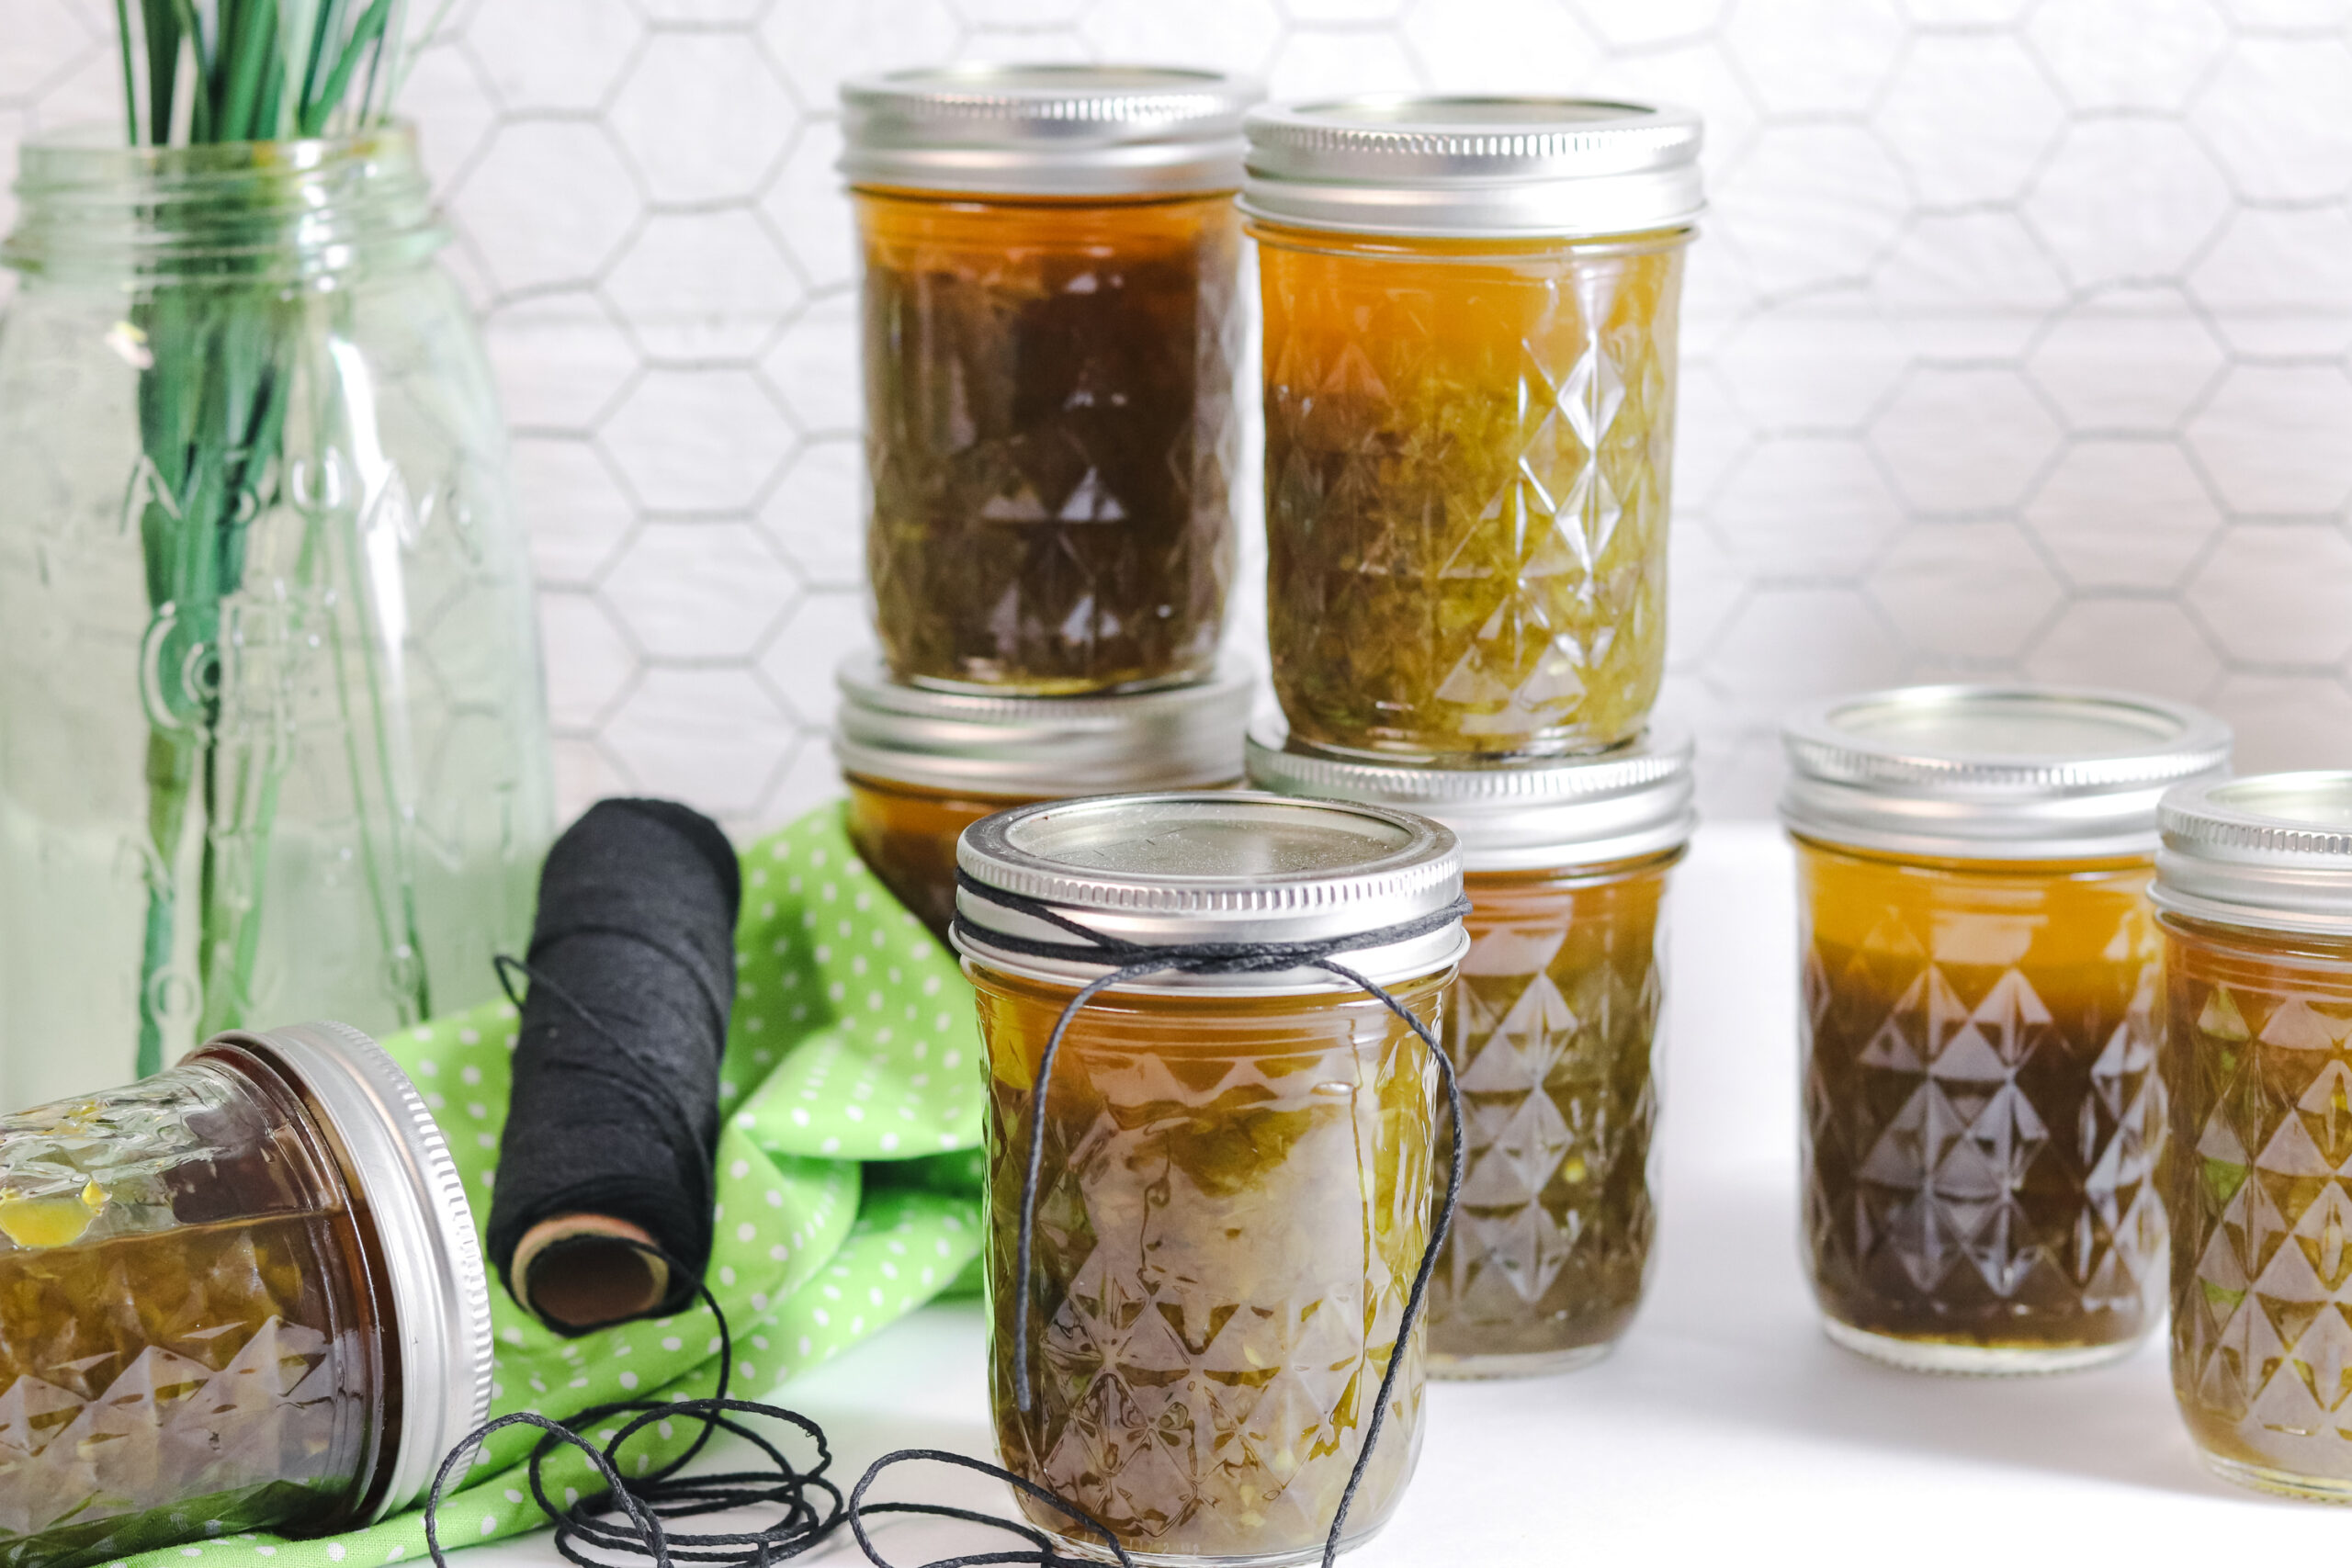 How to make Hot Green Pepper Jelly